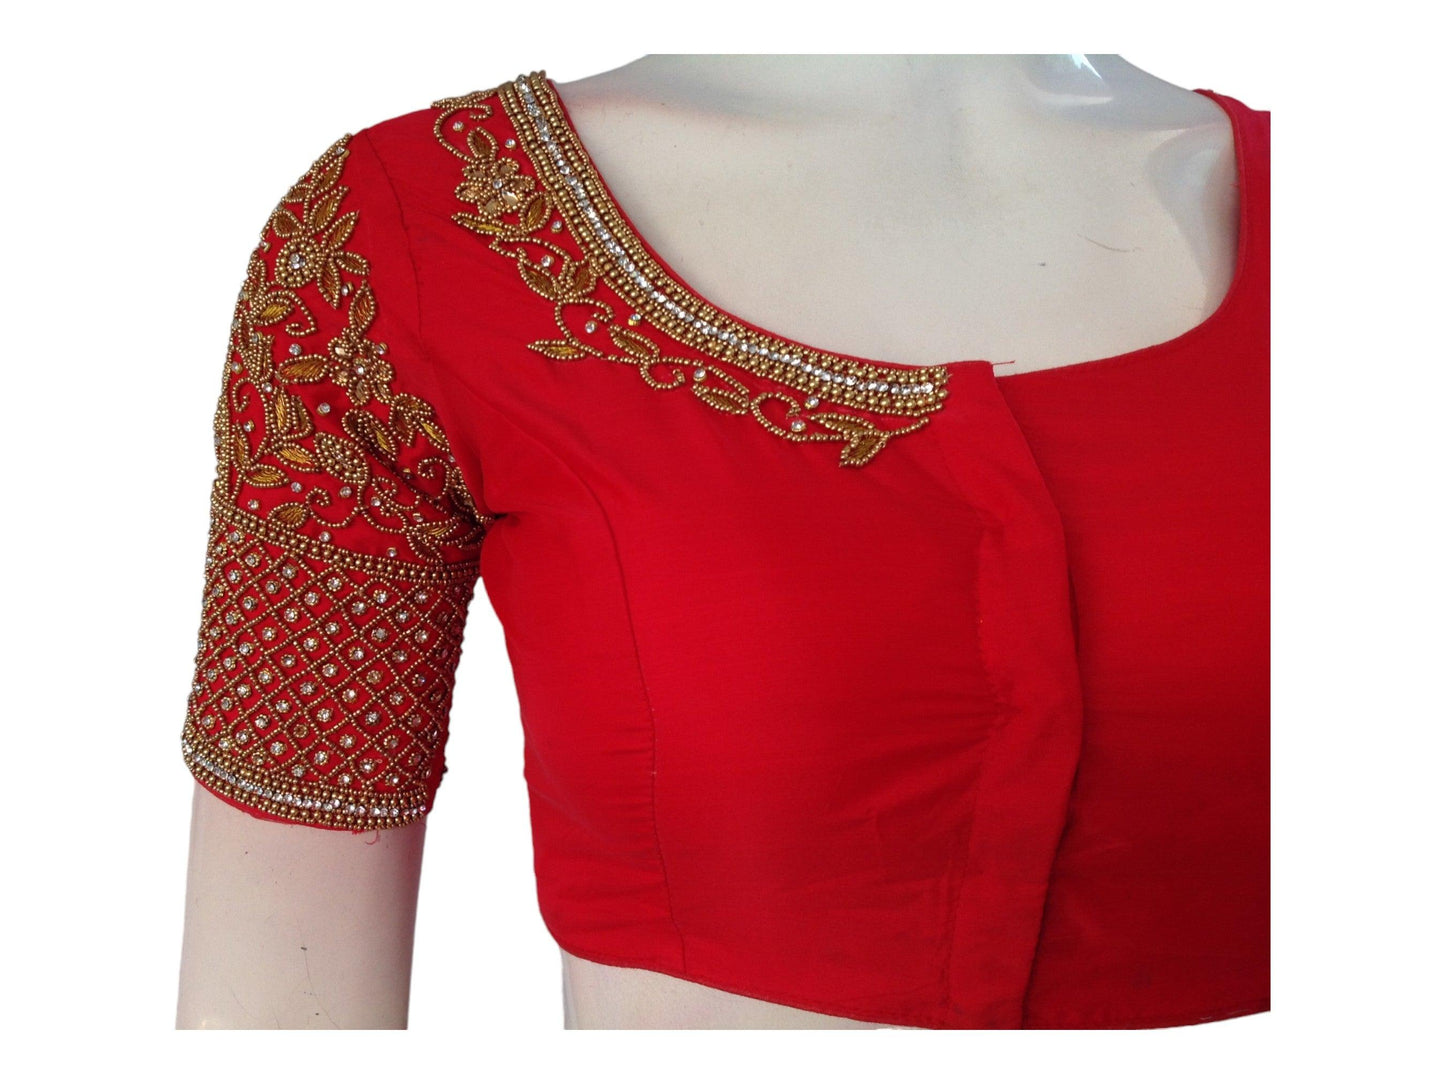 Red Color Bridal Handwork Readymade Saree Blouse, Indian Ethnic Wedding Choli top Online